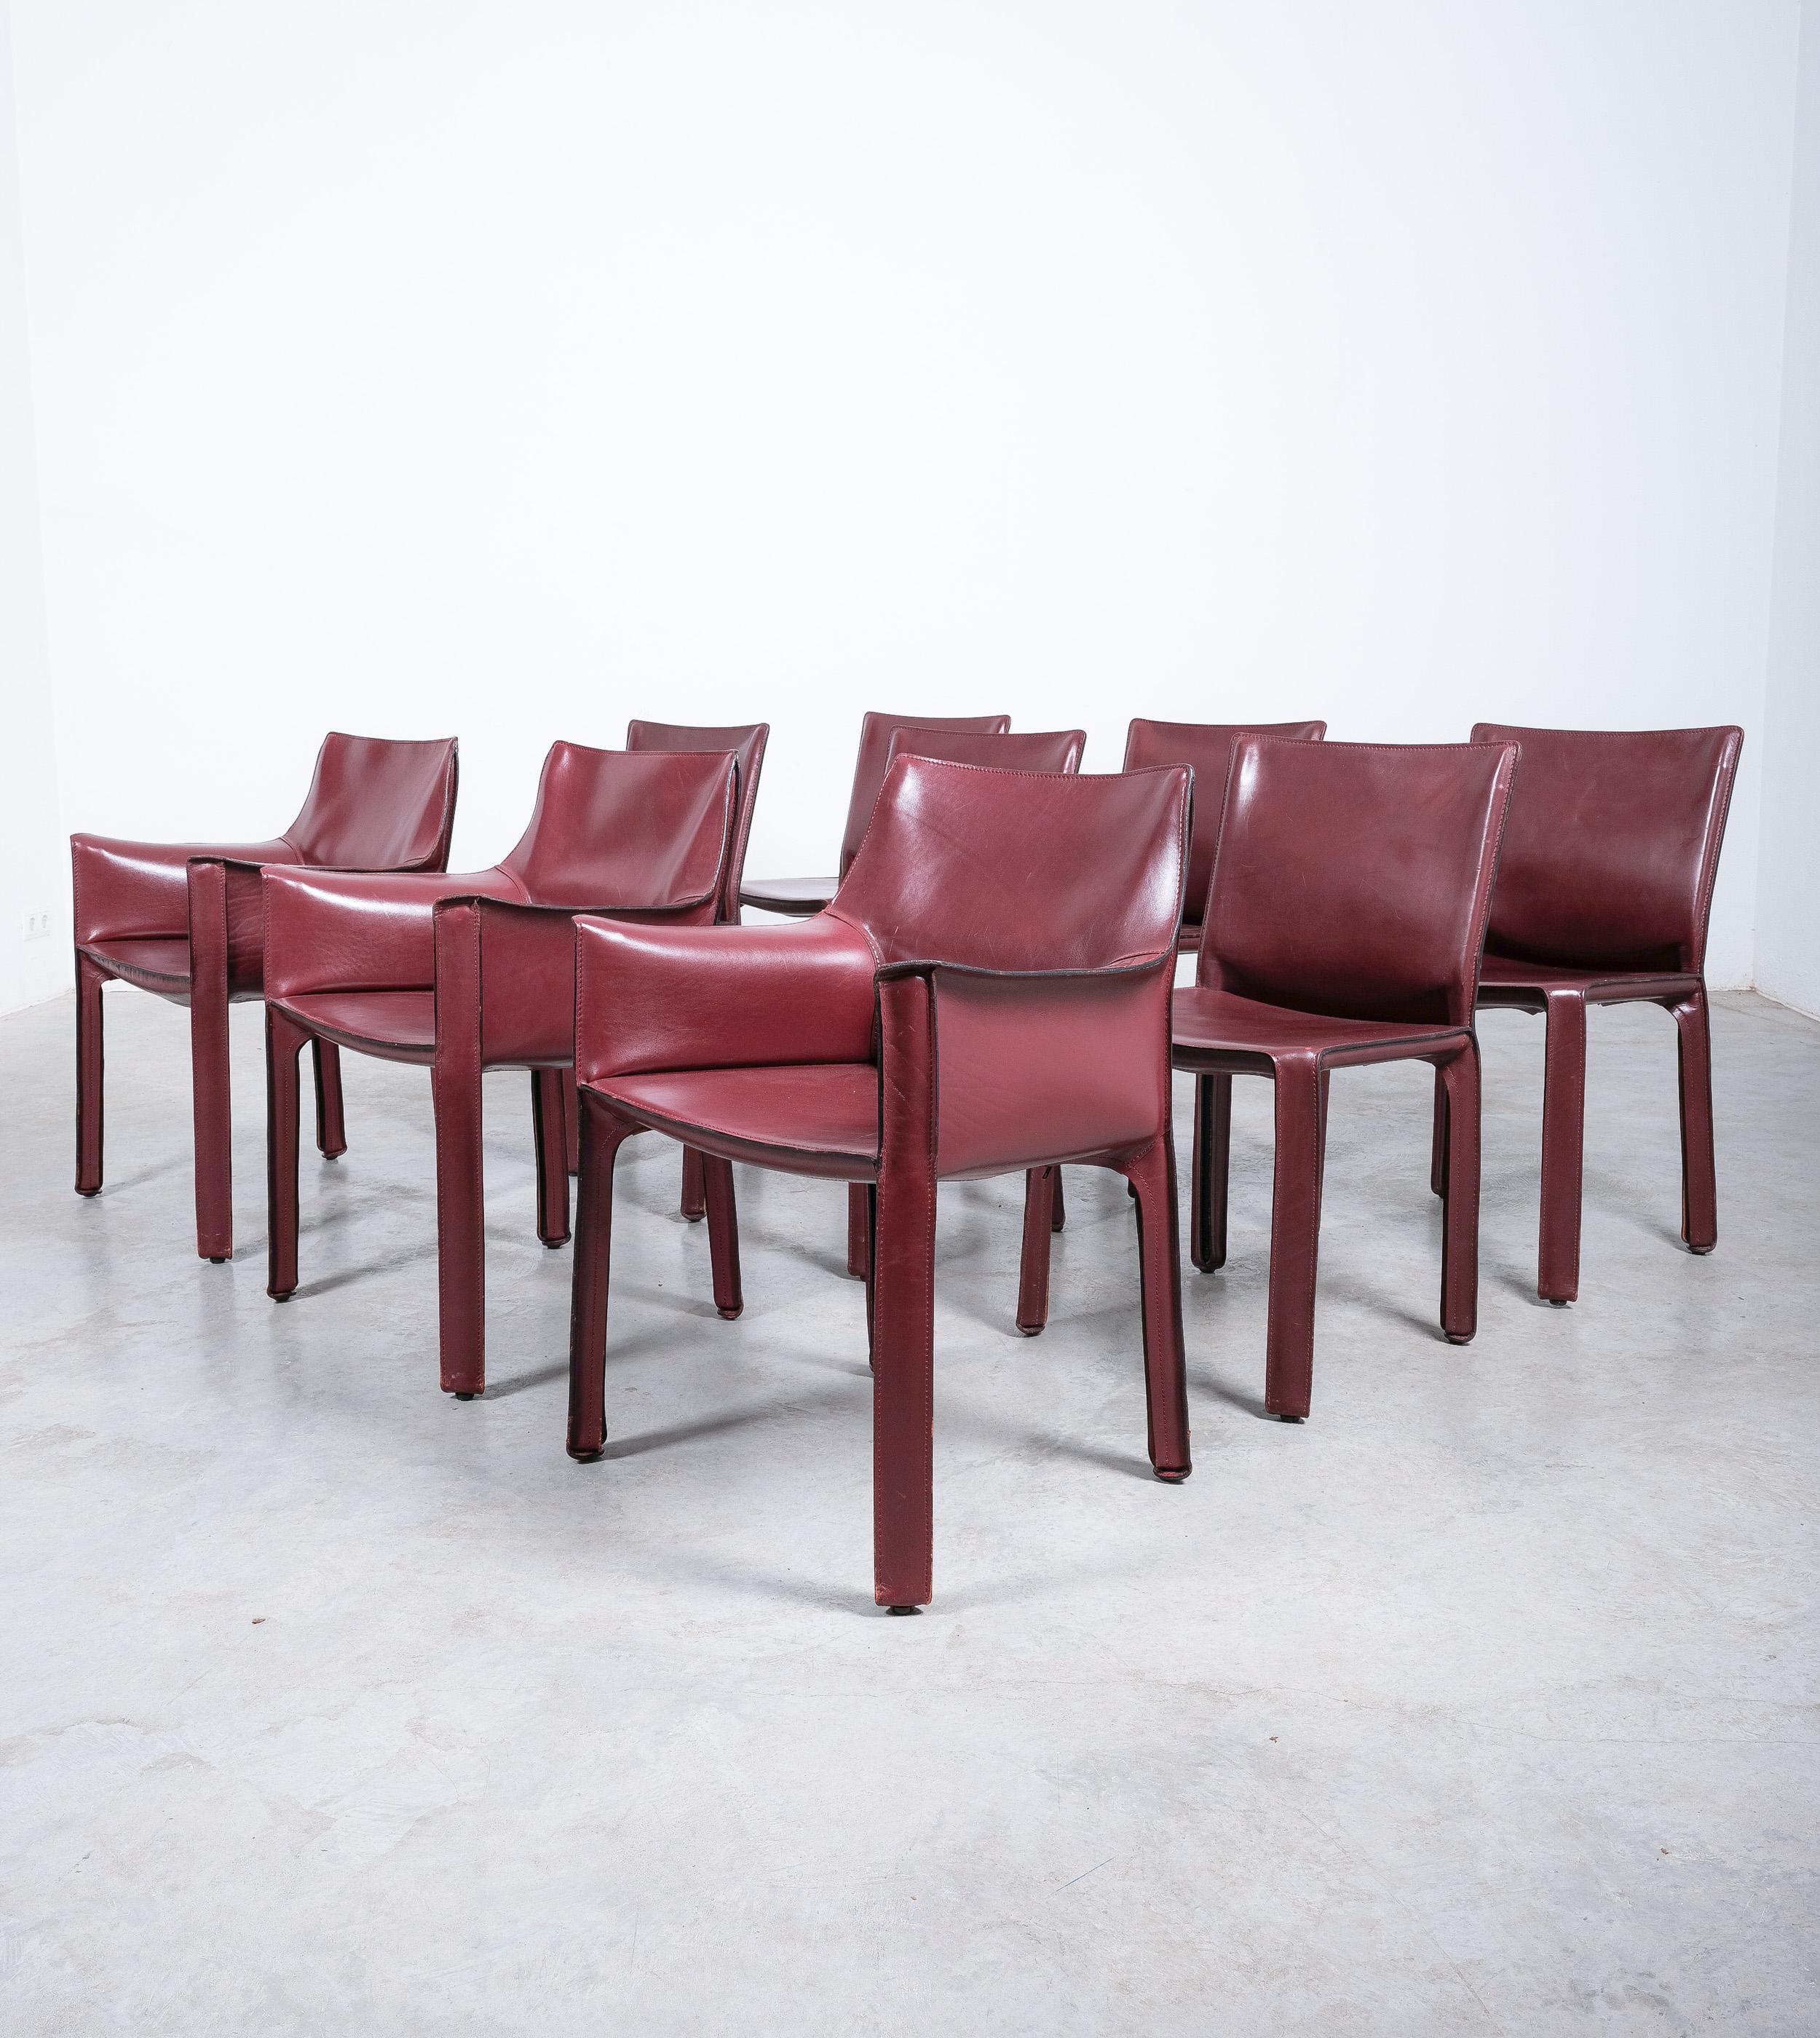 Italian Mario Bellini Cassina Cab 412, 413 Set of Ten 9 Red Leather Dining Chairs